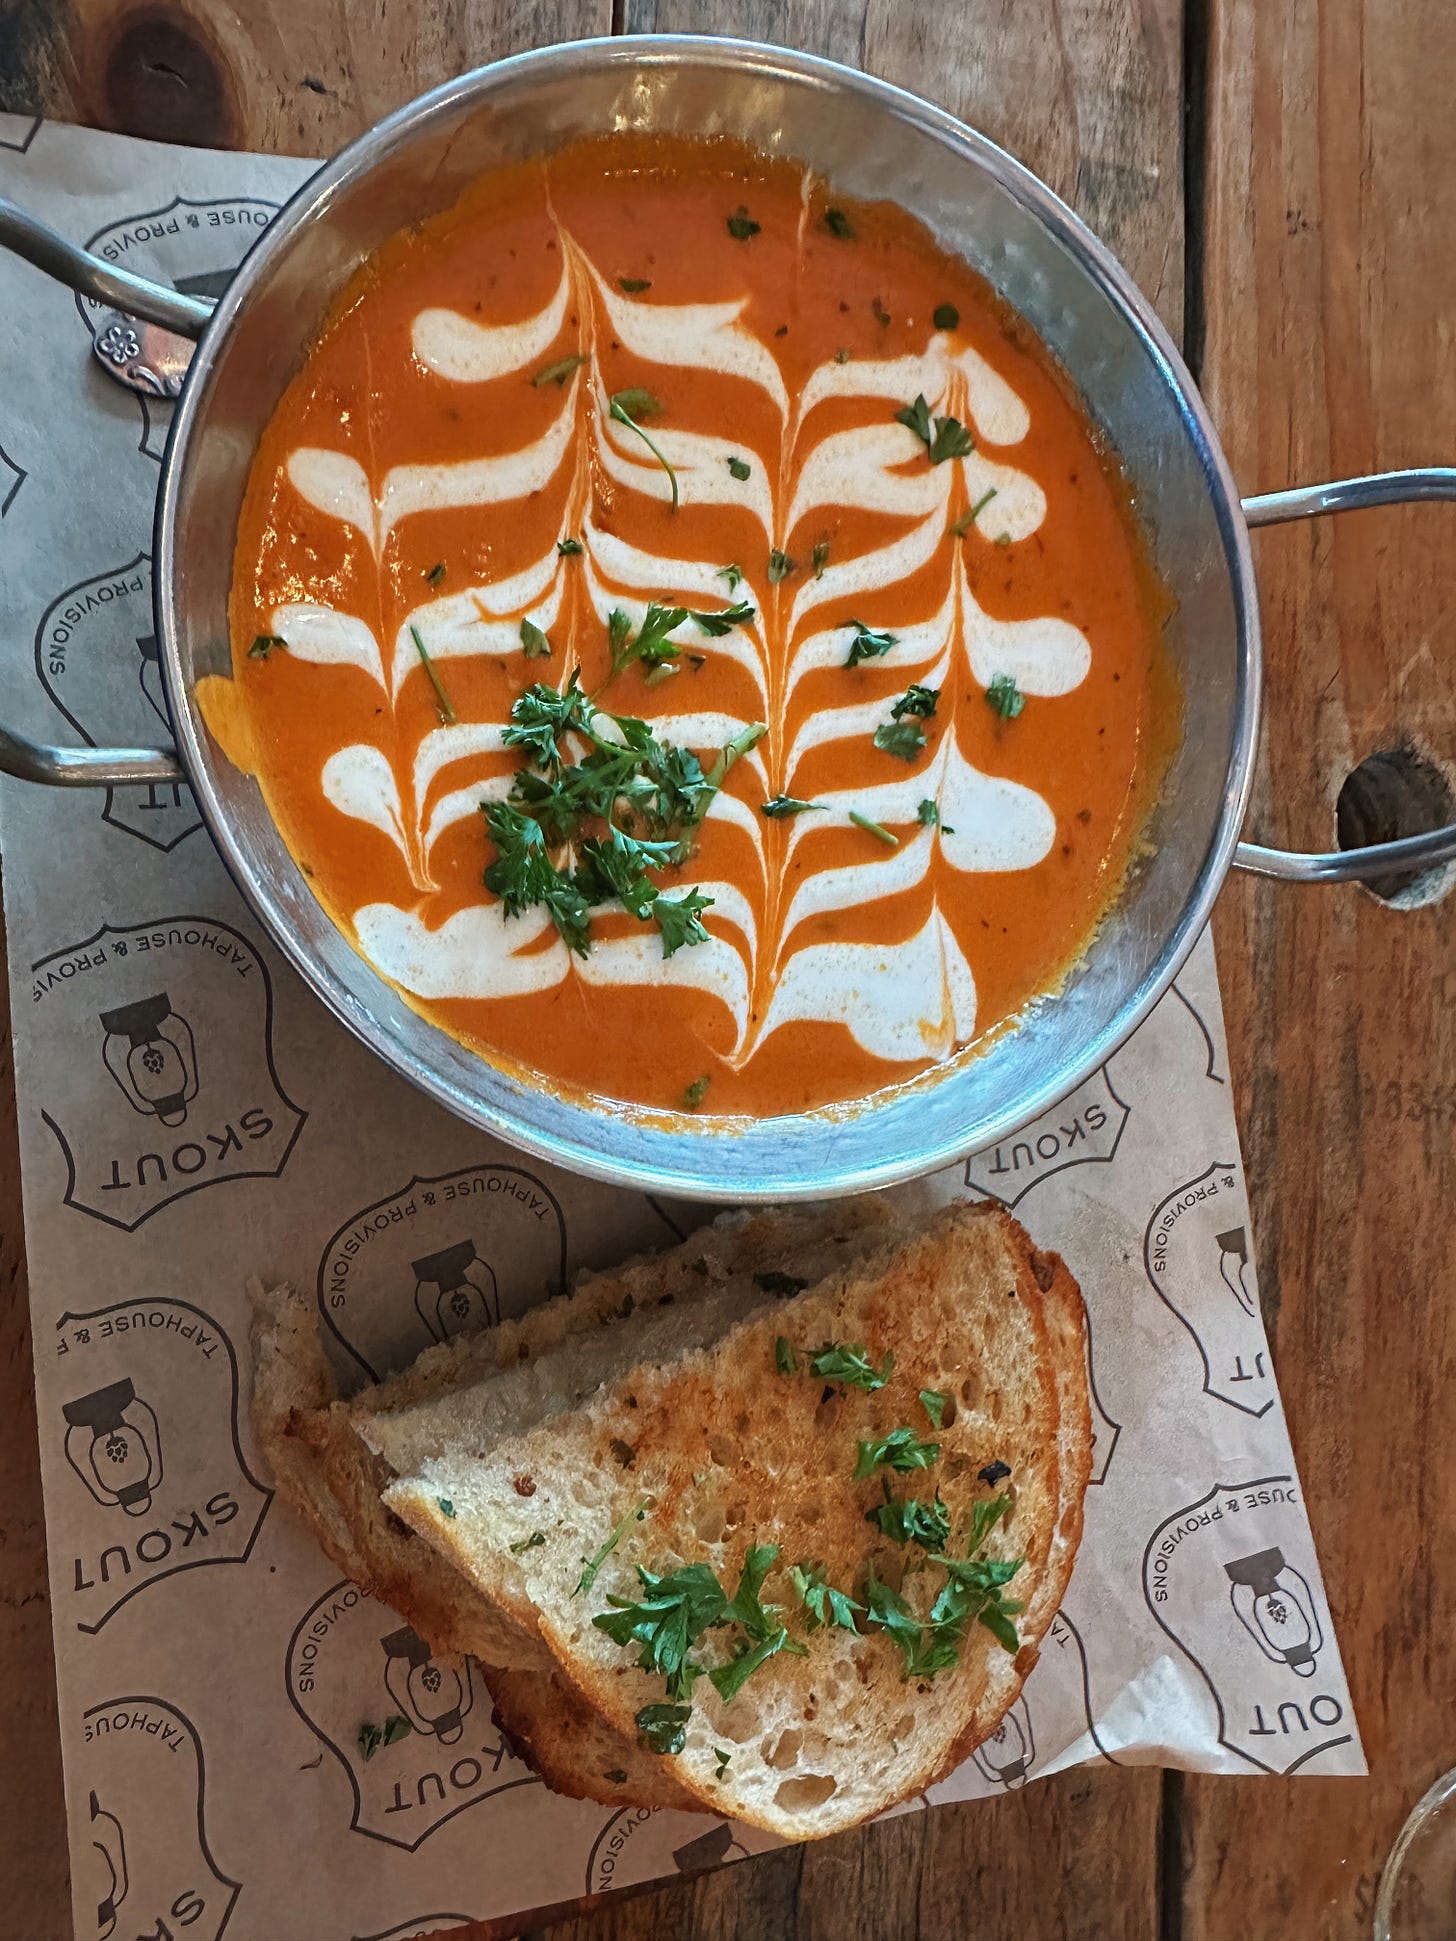 Tomato soup and a grilled cheese sandwich at Taphouse and Provisions